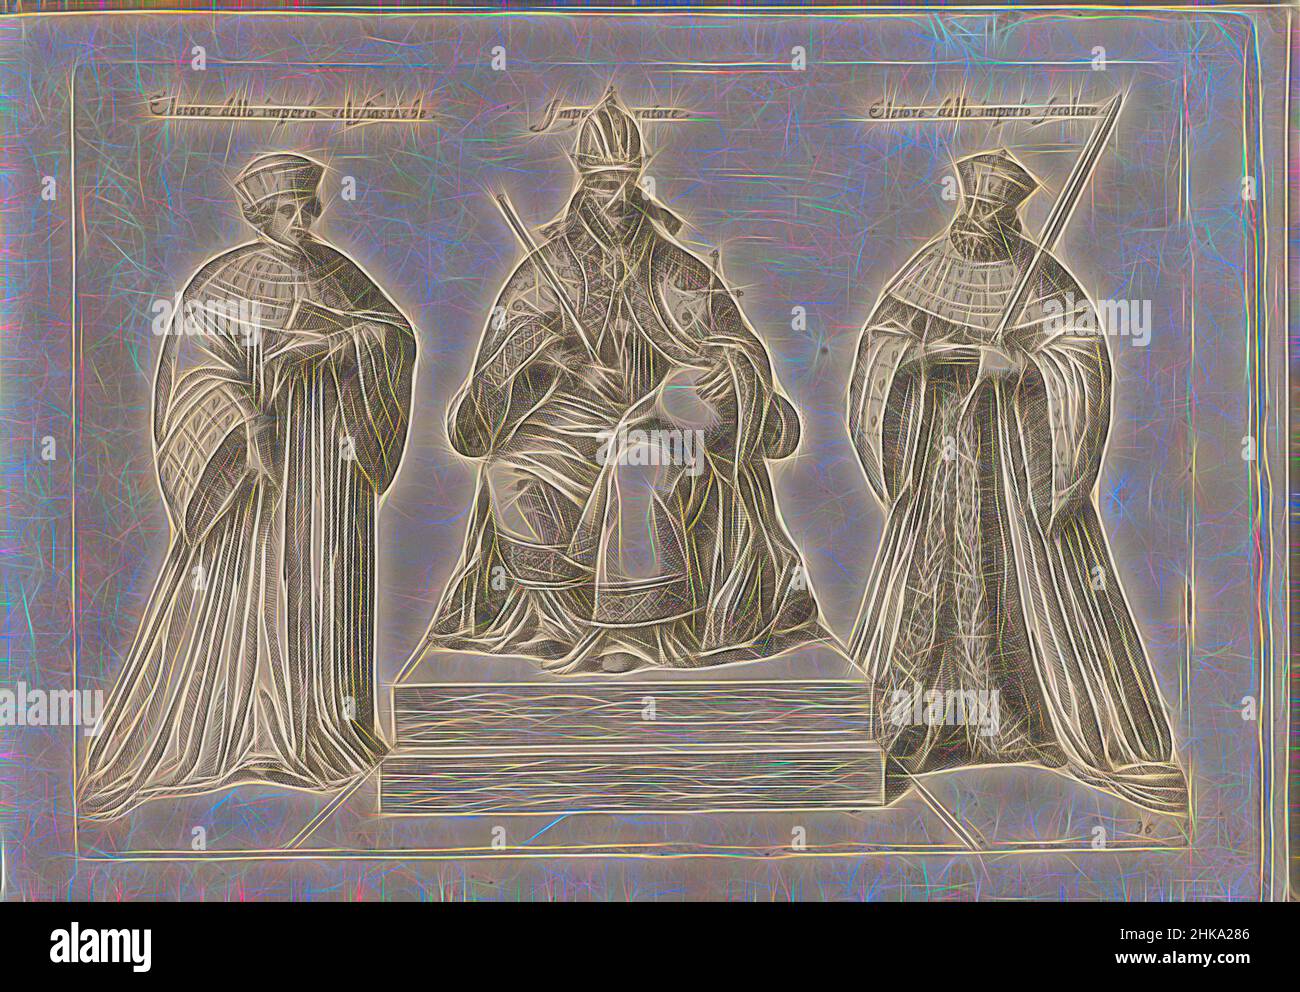 Inspired by An emperor on his throne, flanked by a secular and an ecclesiastical prelate.Eletore dello imperio eclesiastiche, Imperator, Eletore dello imperio secolare, Print from album 'Dei veri ritratti degl'habiti di tvtte le parti del mondo intagliati in rame per opra di Bartolomeo Grassi', 1585, Reimagined by Artotop. Classic art reinvented with a modern twist. Design of warm cheerful glowing of brightness and light ray radiance. Photography inspired by surrealism and futurism, embracing dynamic energy of modern technology, movement, speed and revolutionize culture Stock Photo